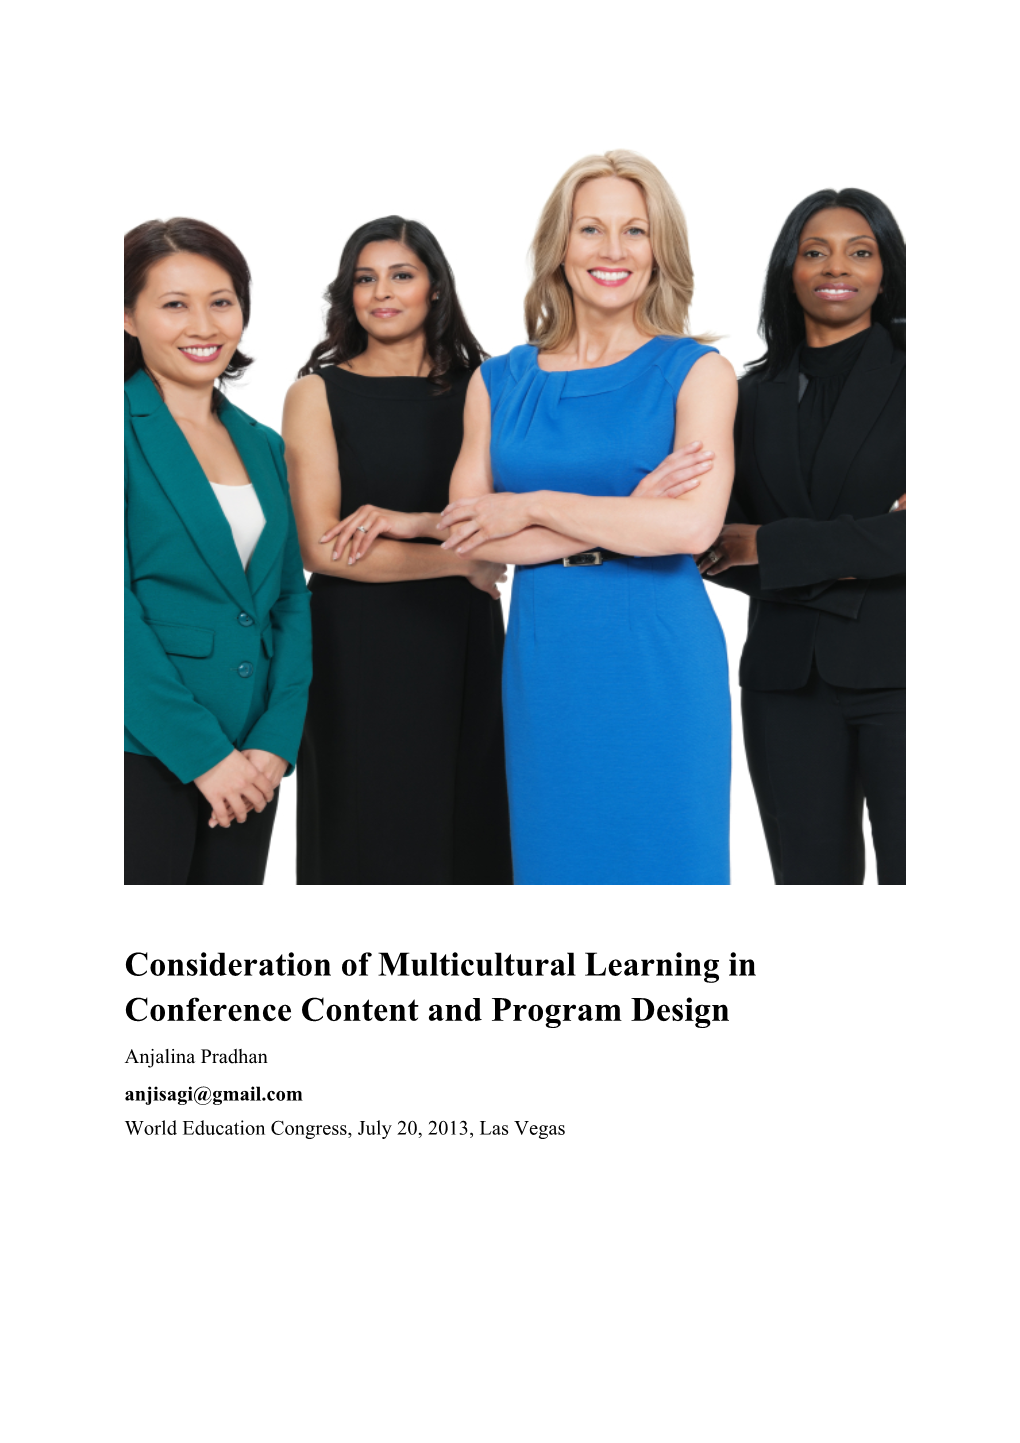 Consideration of Multicultural Learning in Conference Content